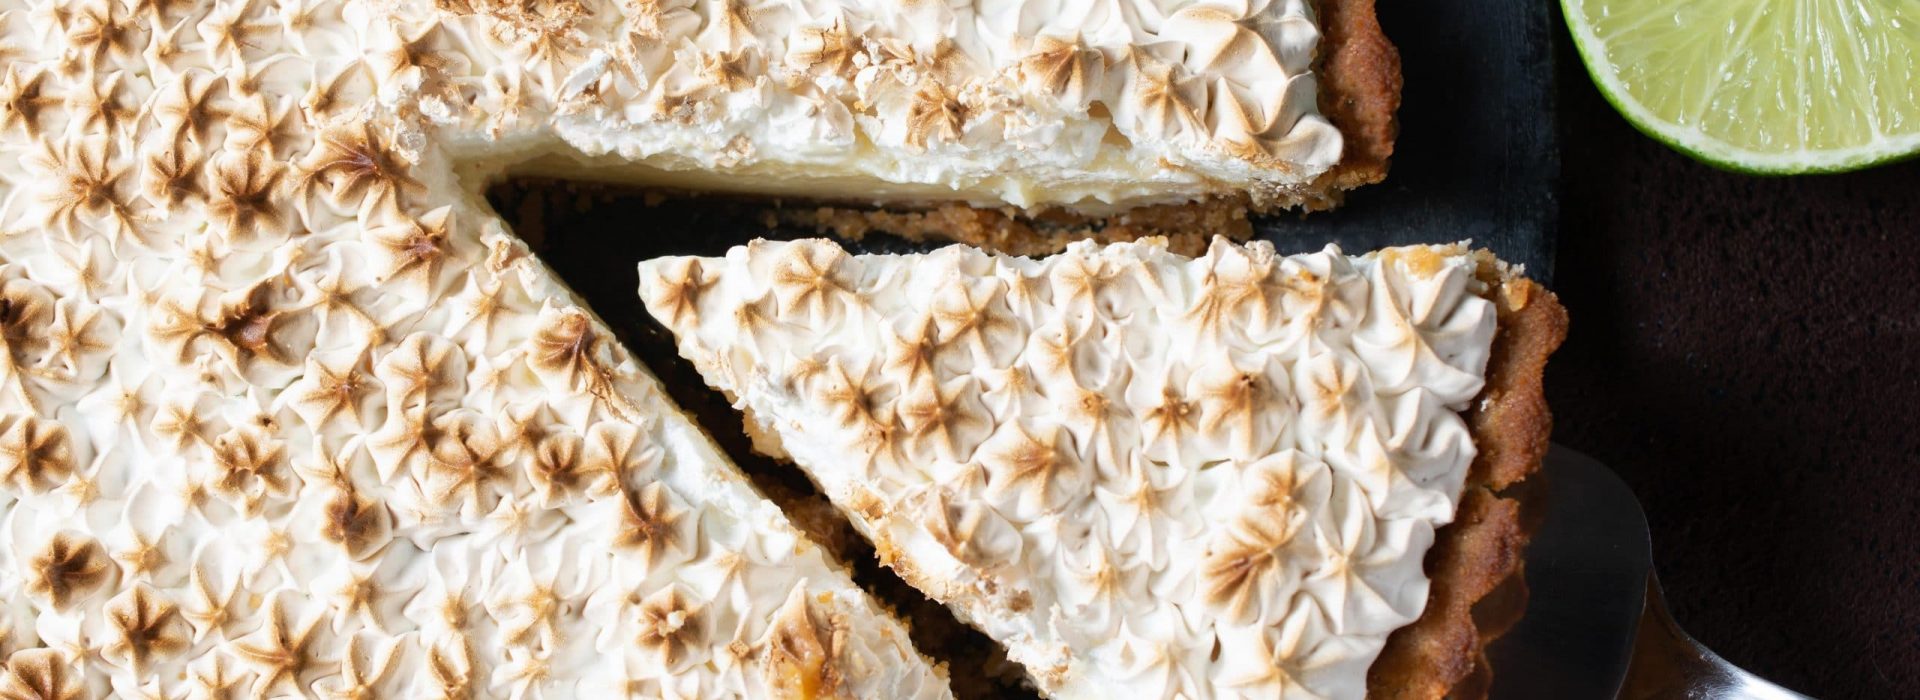 The Mystery Case Surrounding the Lemon Meringue Pie Topping scaled